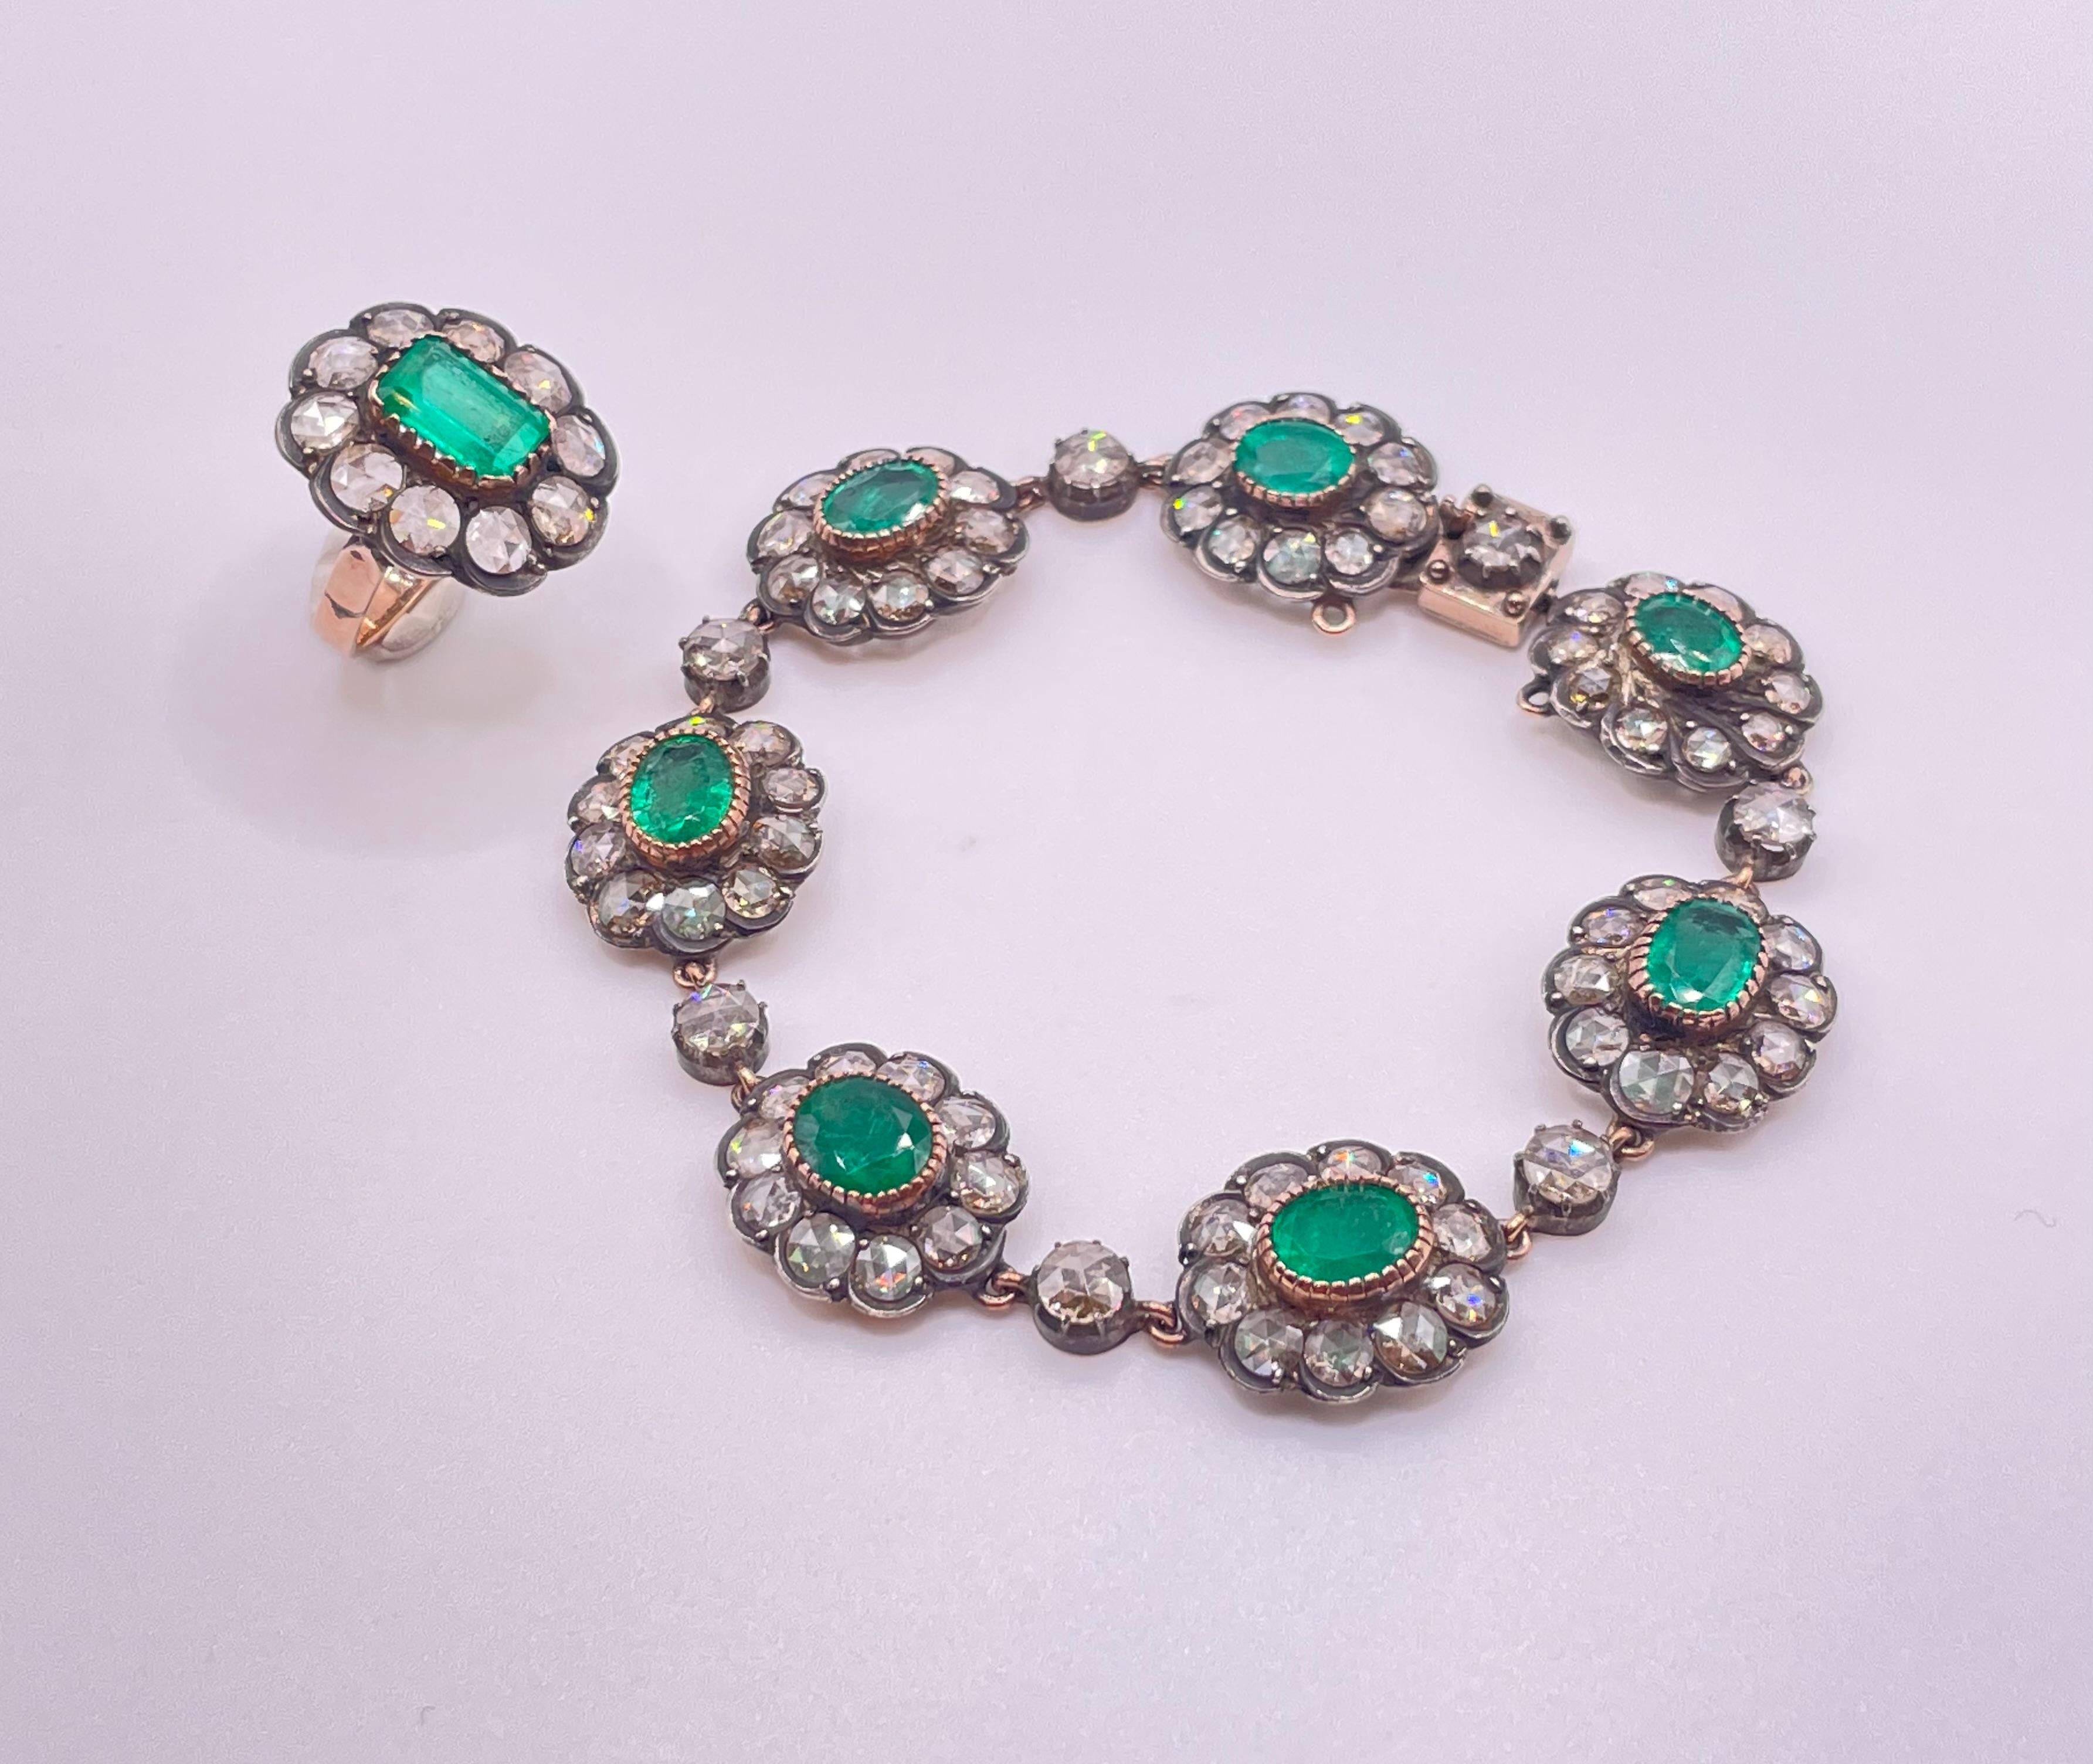 spectacular antique bracelet and ring cast in 14 karat gold and silver ,this set has approximately 8.00 carat emerald , 6.00 carat rose-cut diamond .

